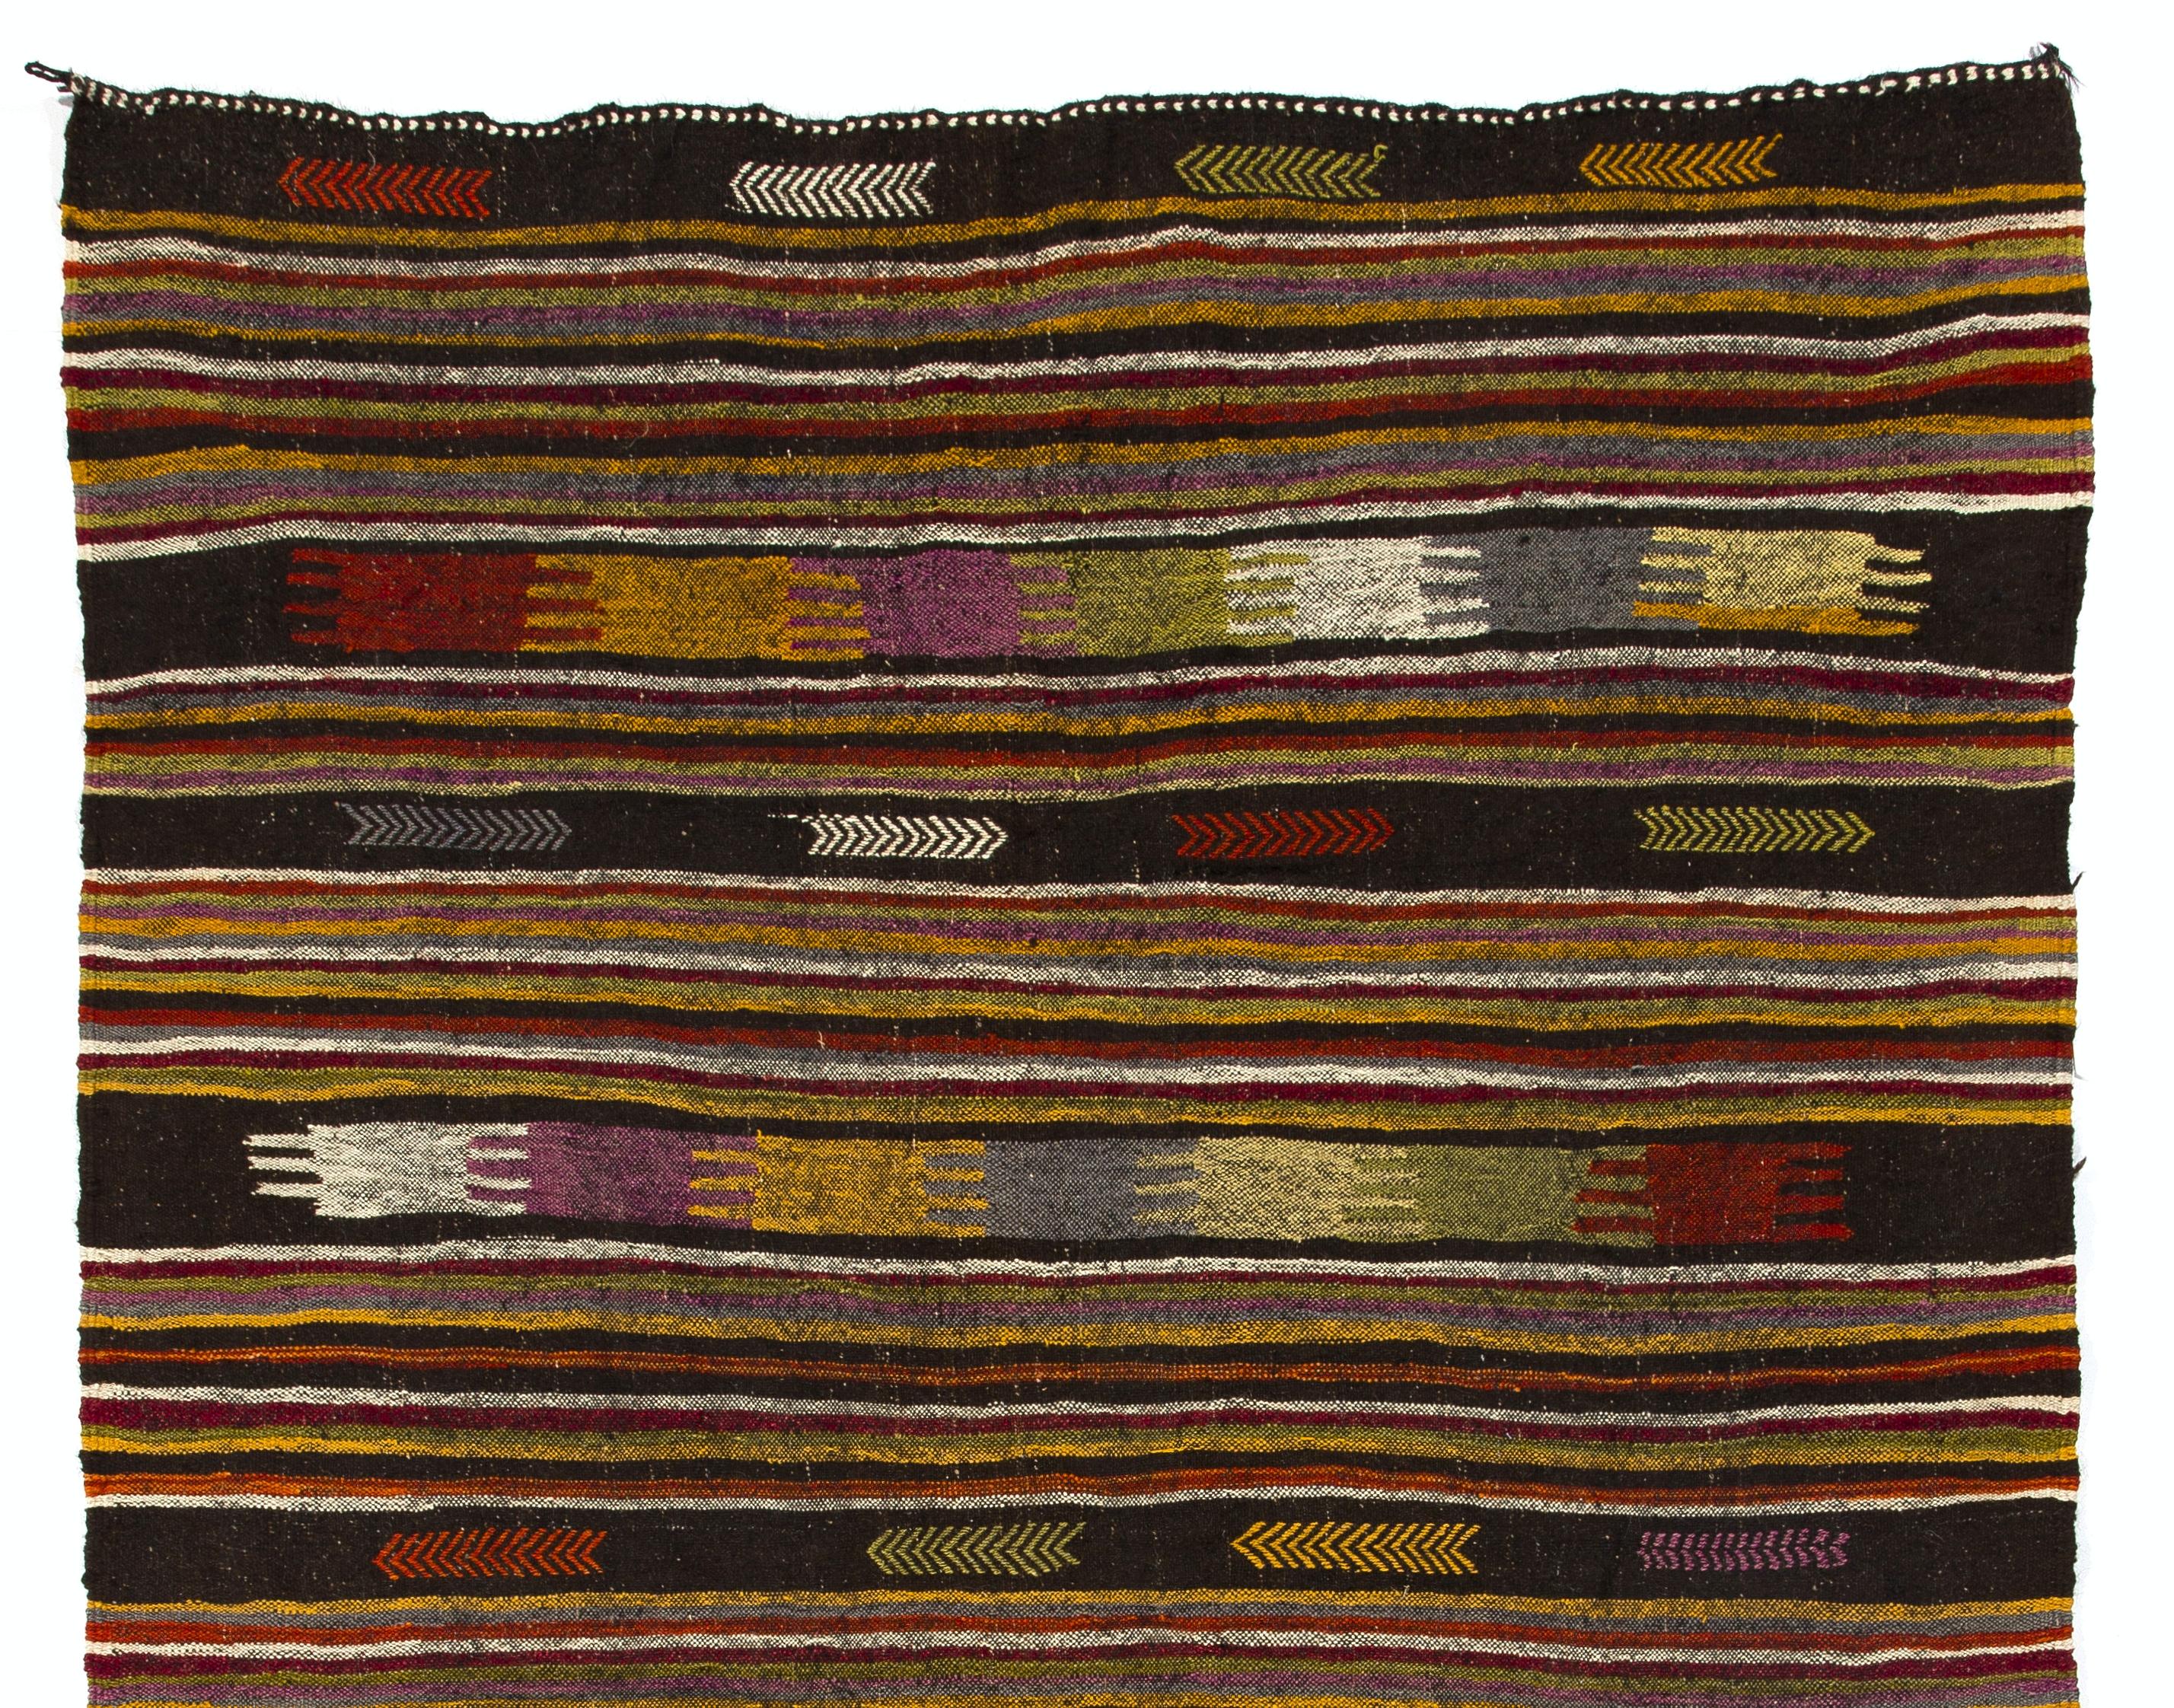 Turkish 5.8x9 Ft Vintage Hand-Woven Central Anatolian Kilim Rug with Striped Design For Sale